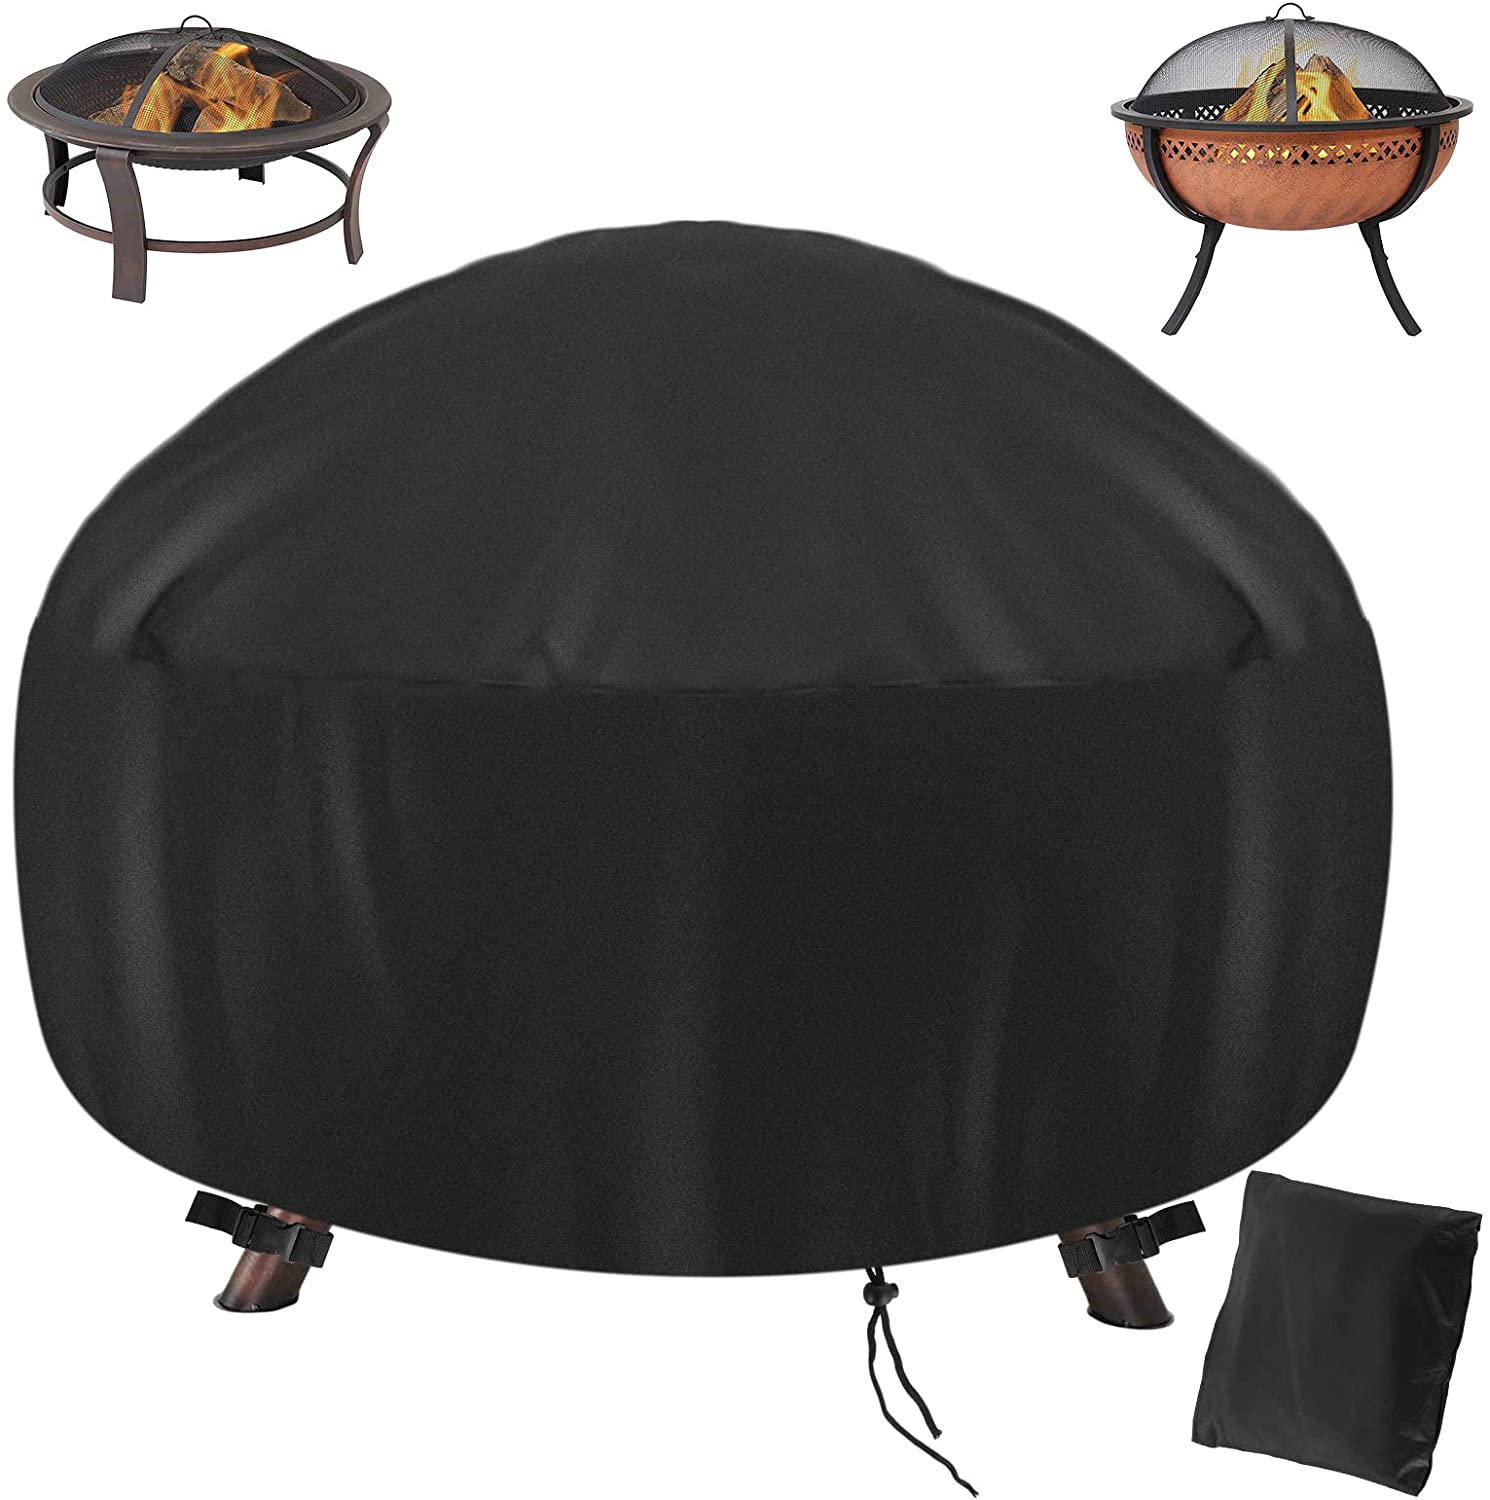 32" 600D Oxford Fire Pit Round Patio Bowl Cover Heavy Duty Waterproof Protector 